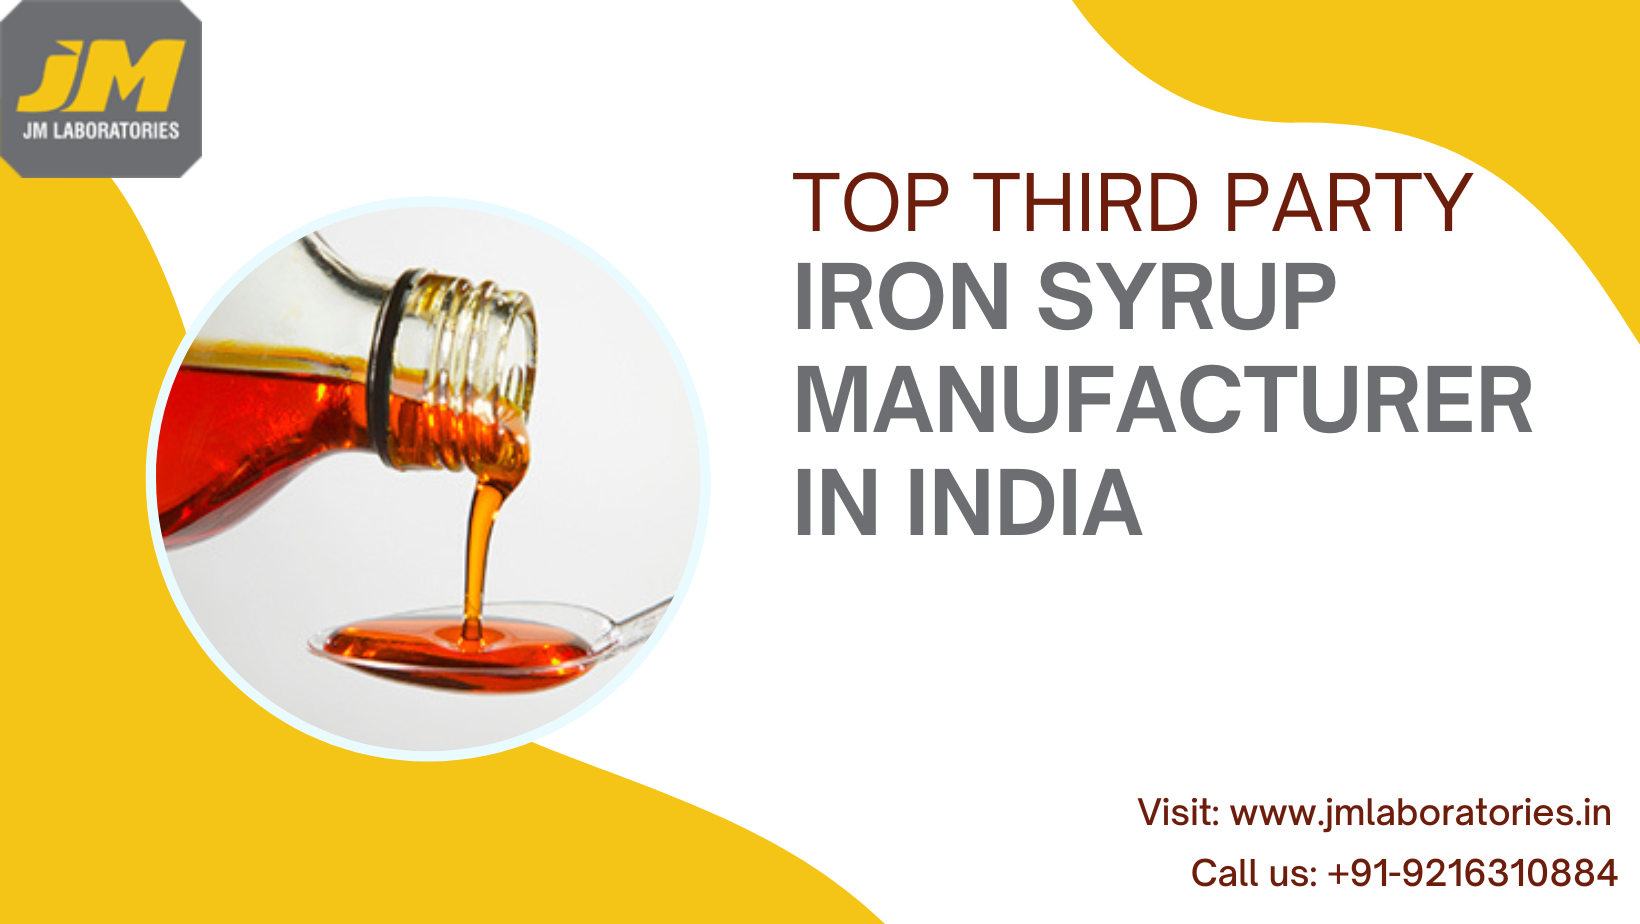 Third Party Iron Syrup Manufacturers in India | JM laboratories